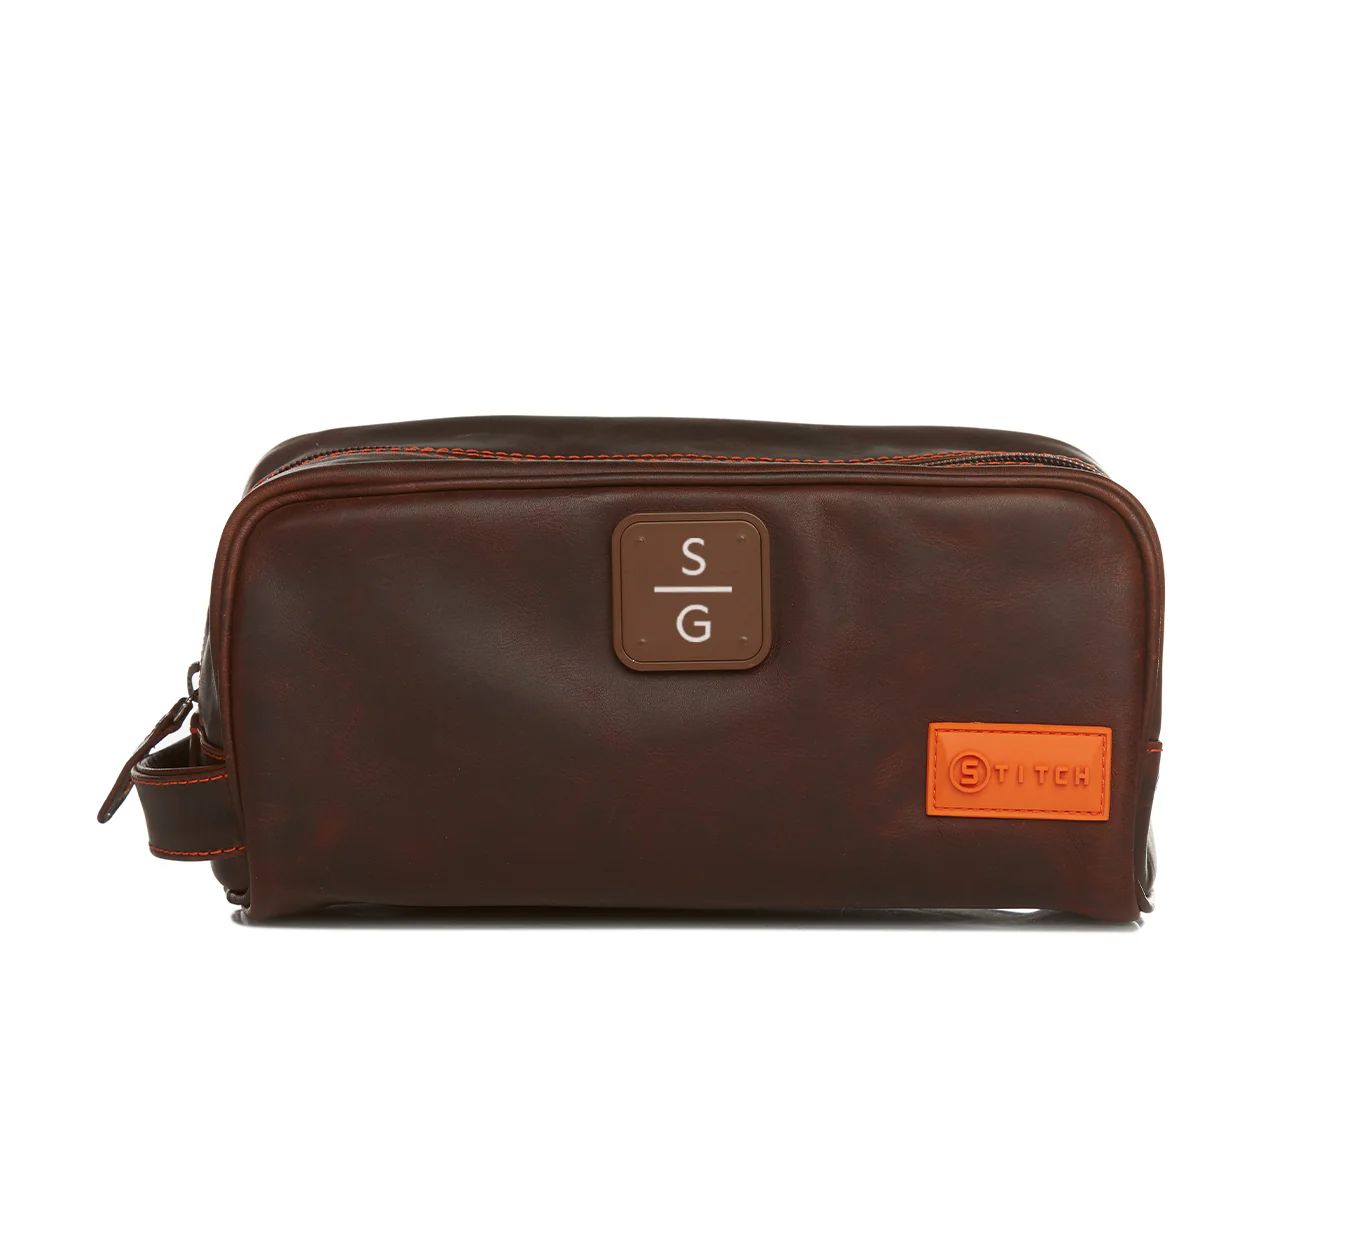 Limited Edition Leather Toiletry Kit | STITCH Golf